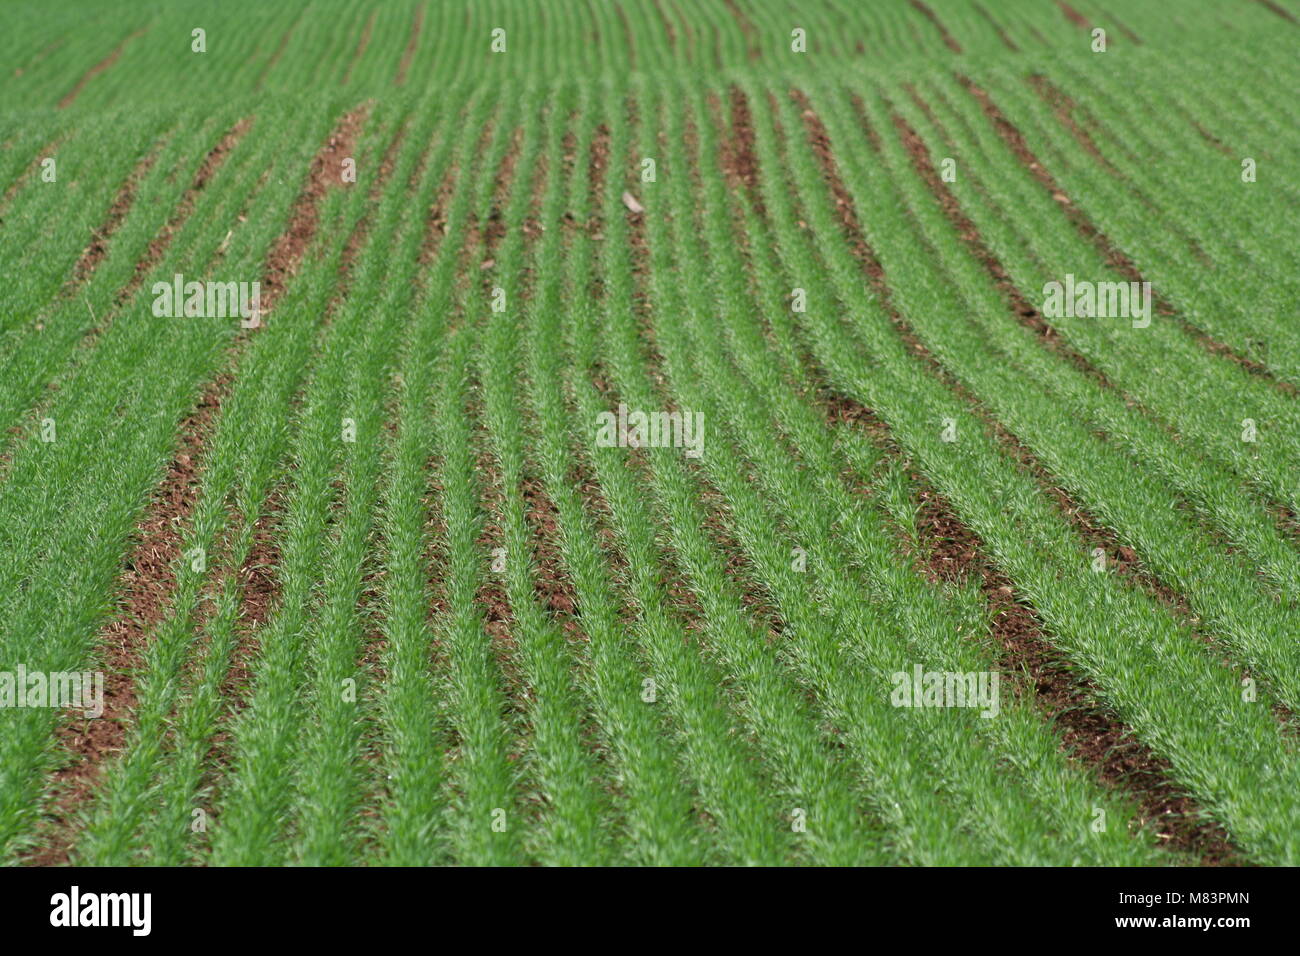 Planted rows of new grass in a field Stock Photo